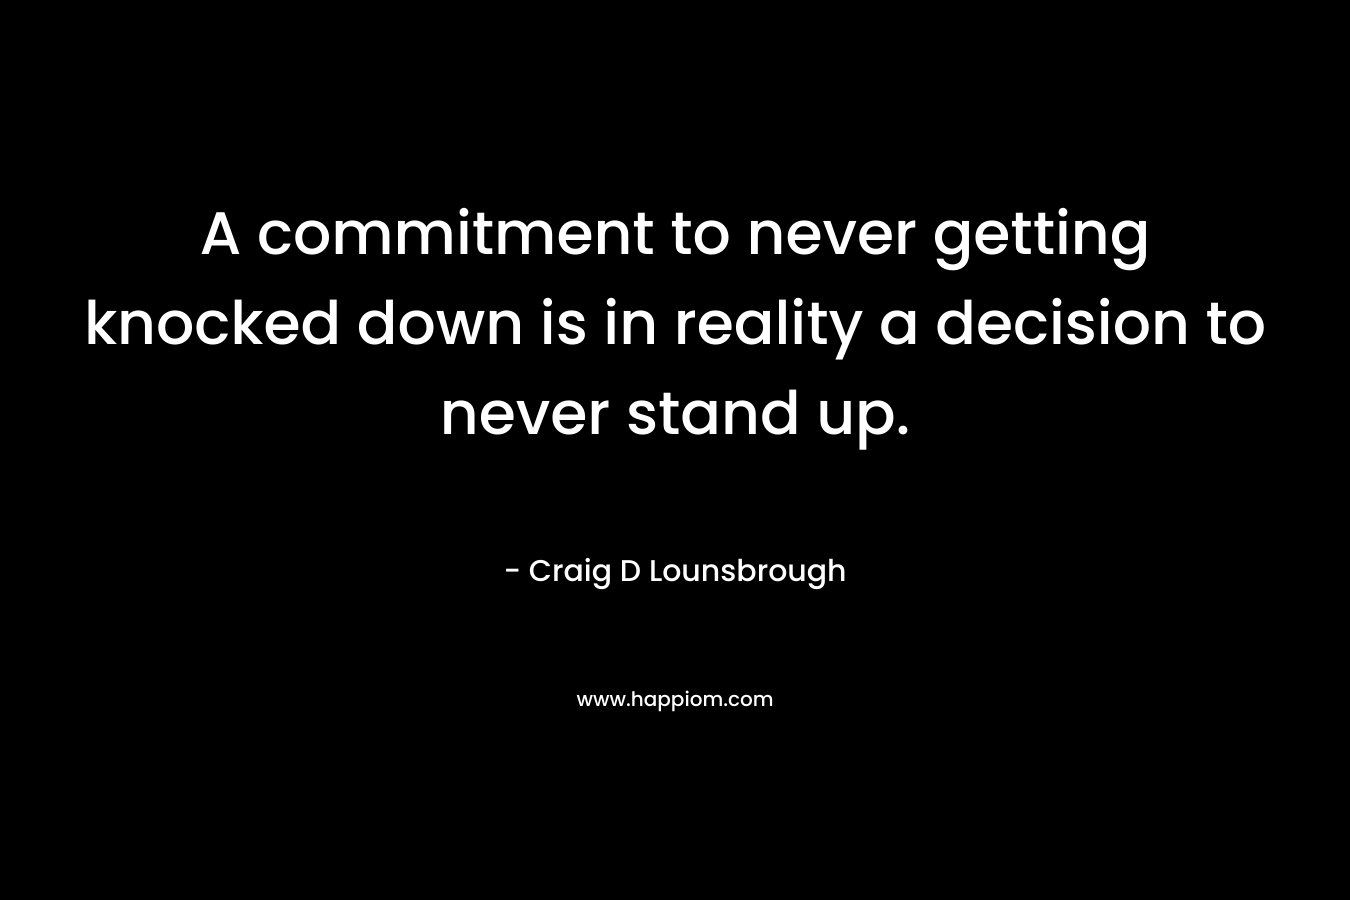 A commitment to never getting knocked down is in reality a decision to never stand up.